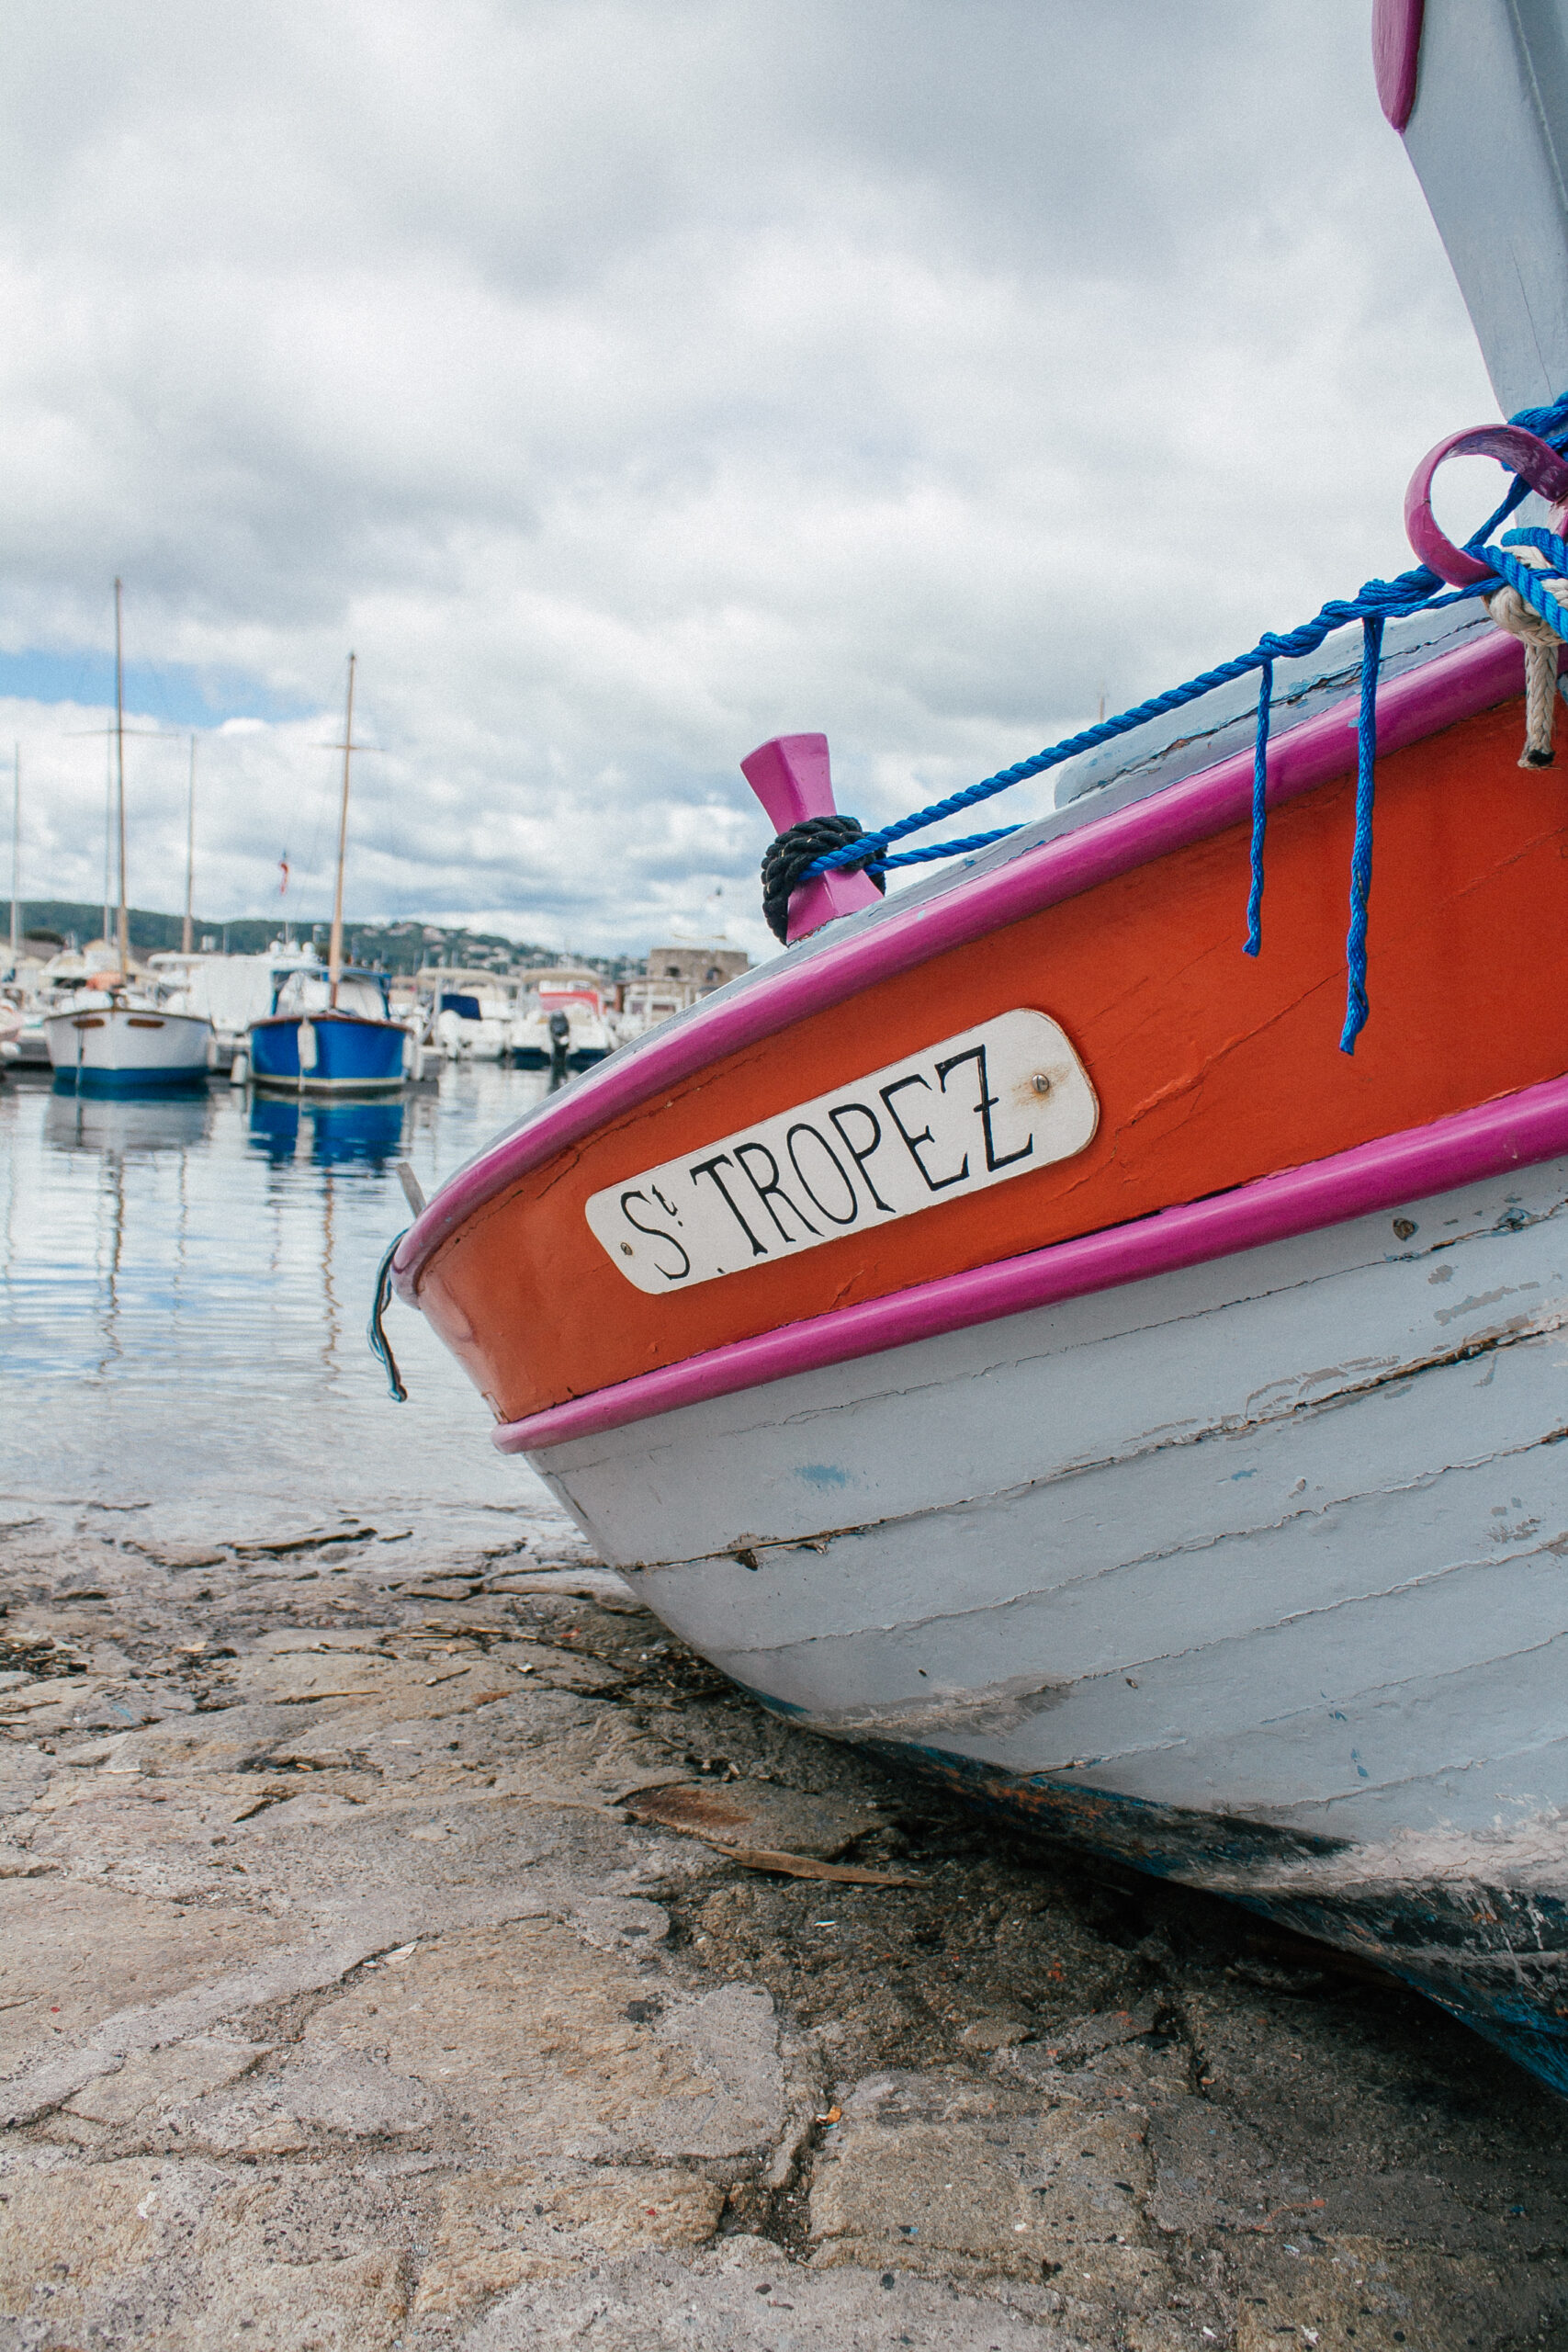 A red and white row boat with the name St Tropez beached up in the Marina of Saint Tropez, France